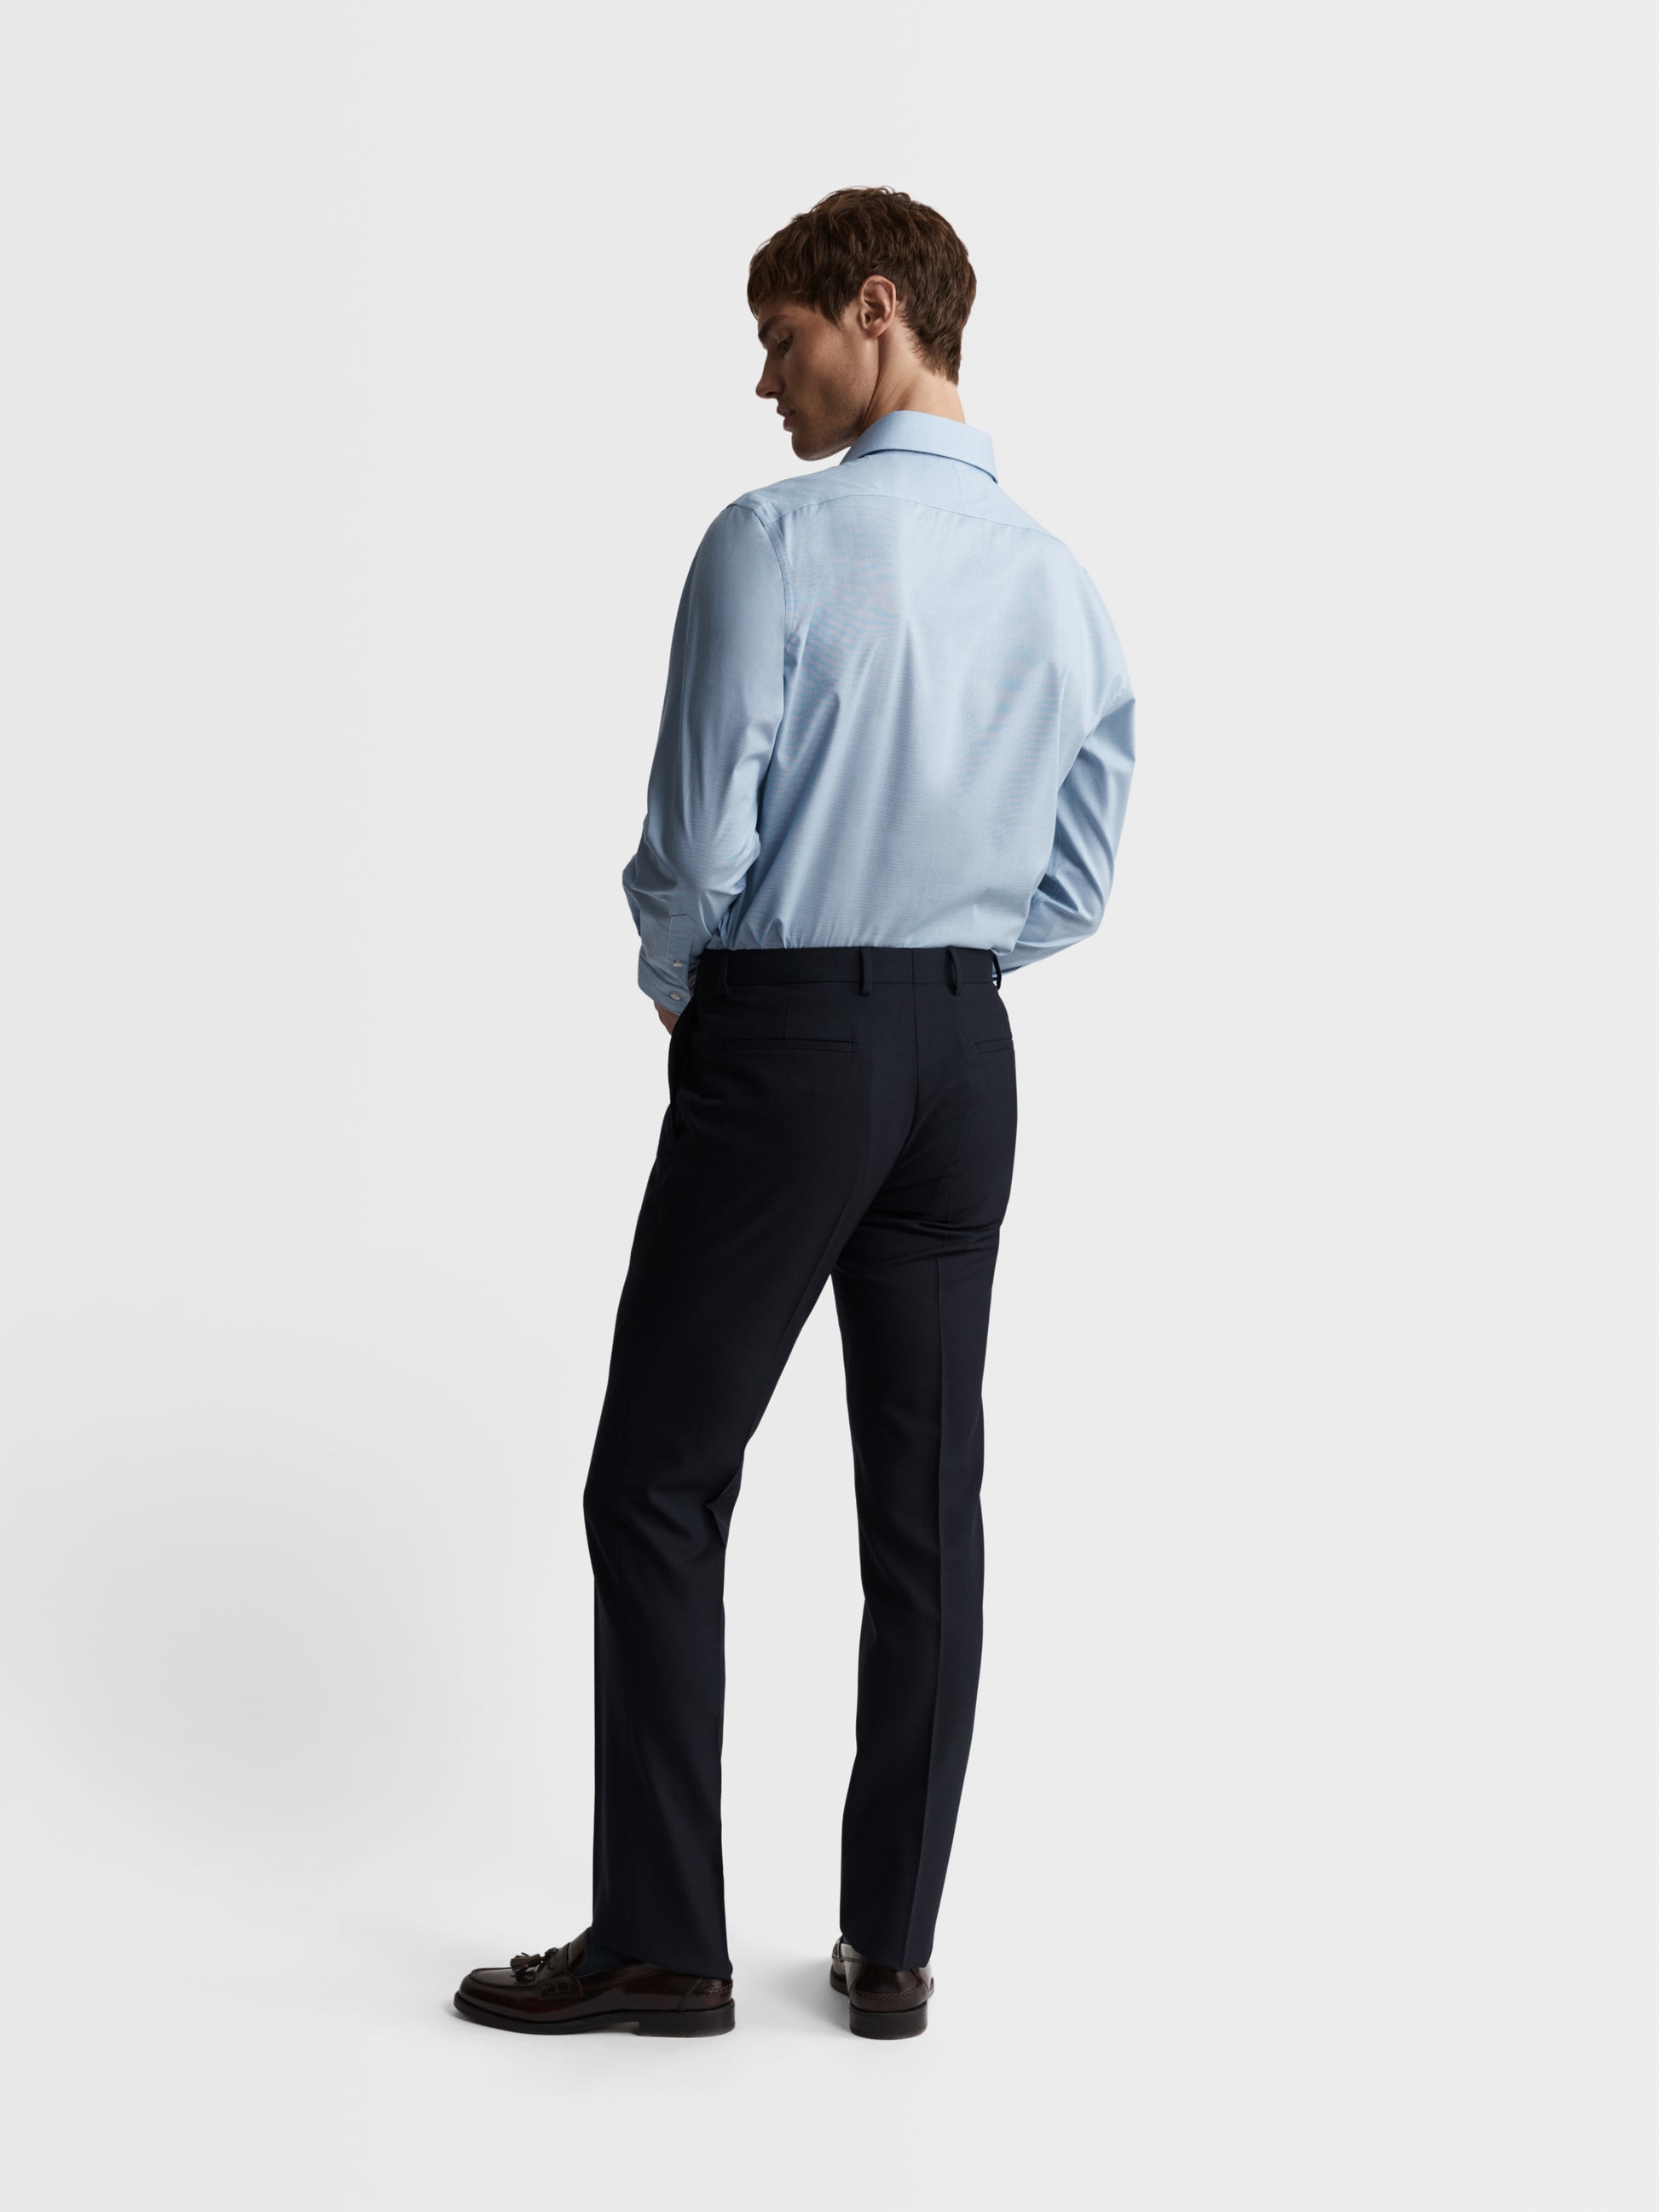 Image 5 of Max Performance Blue Puppytooth Plain Weave Fitted Single Cuff Classic Collar Shirt